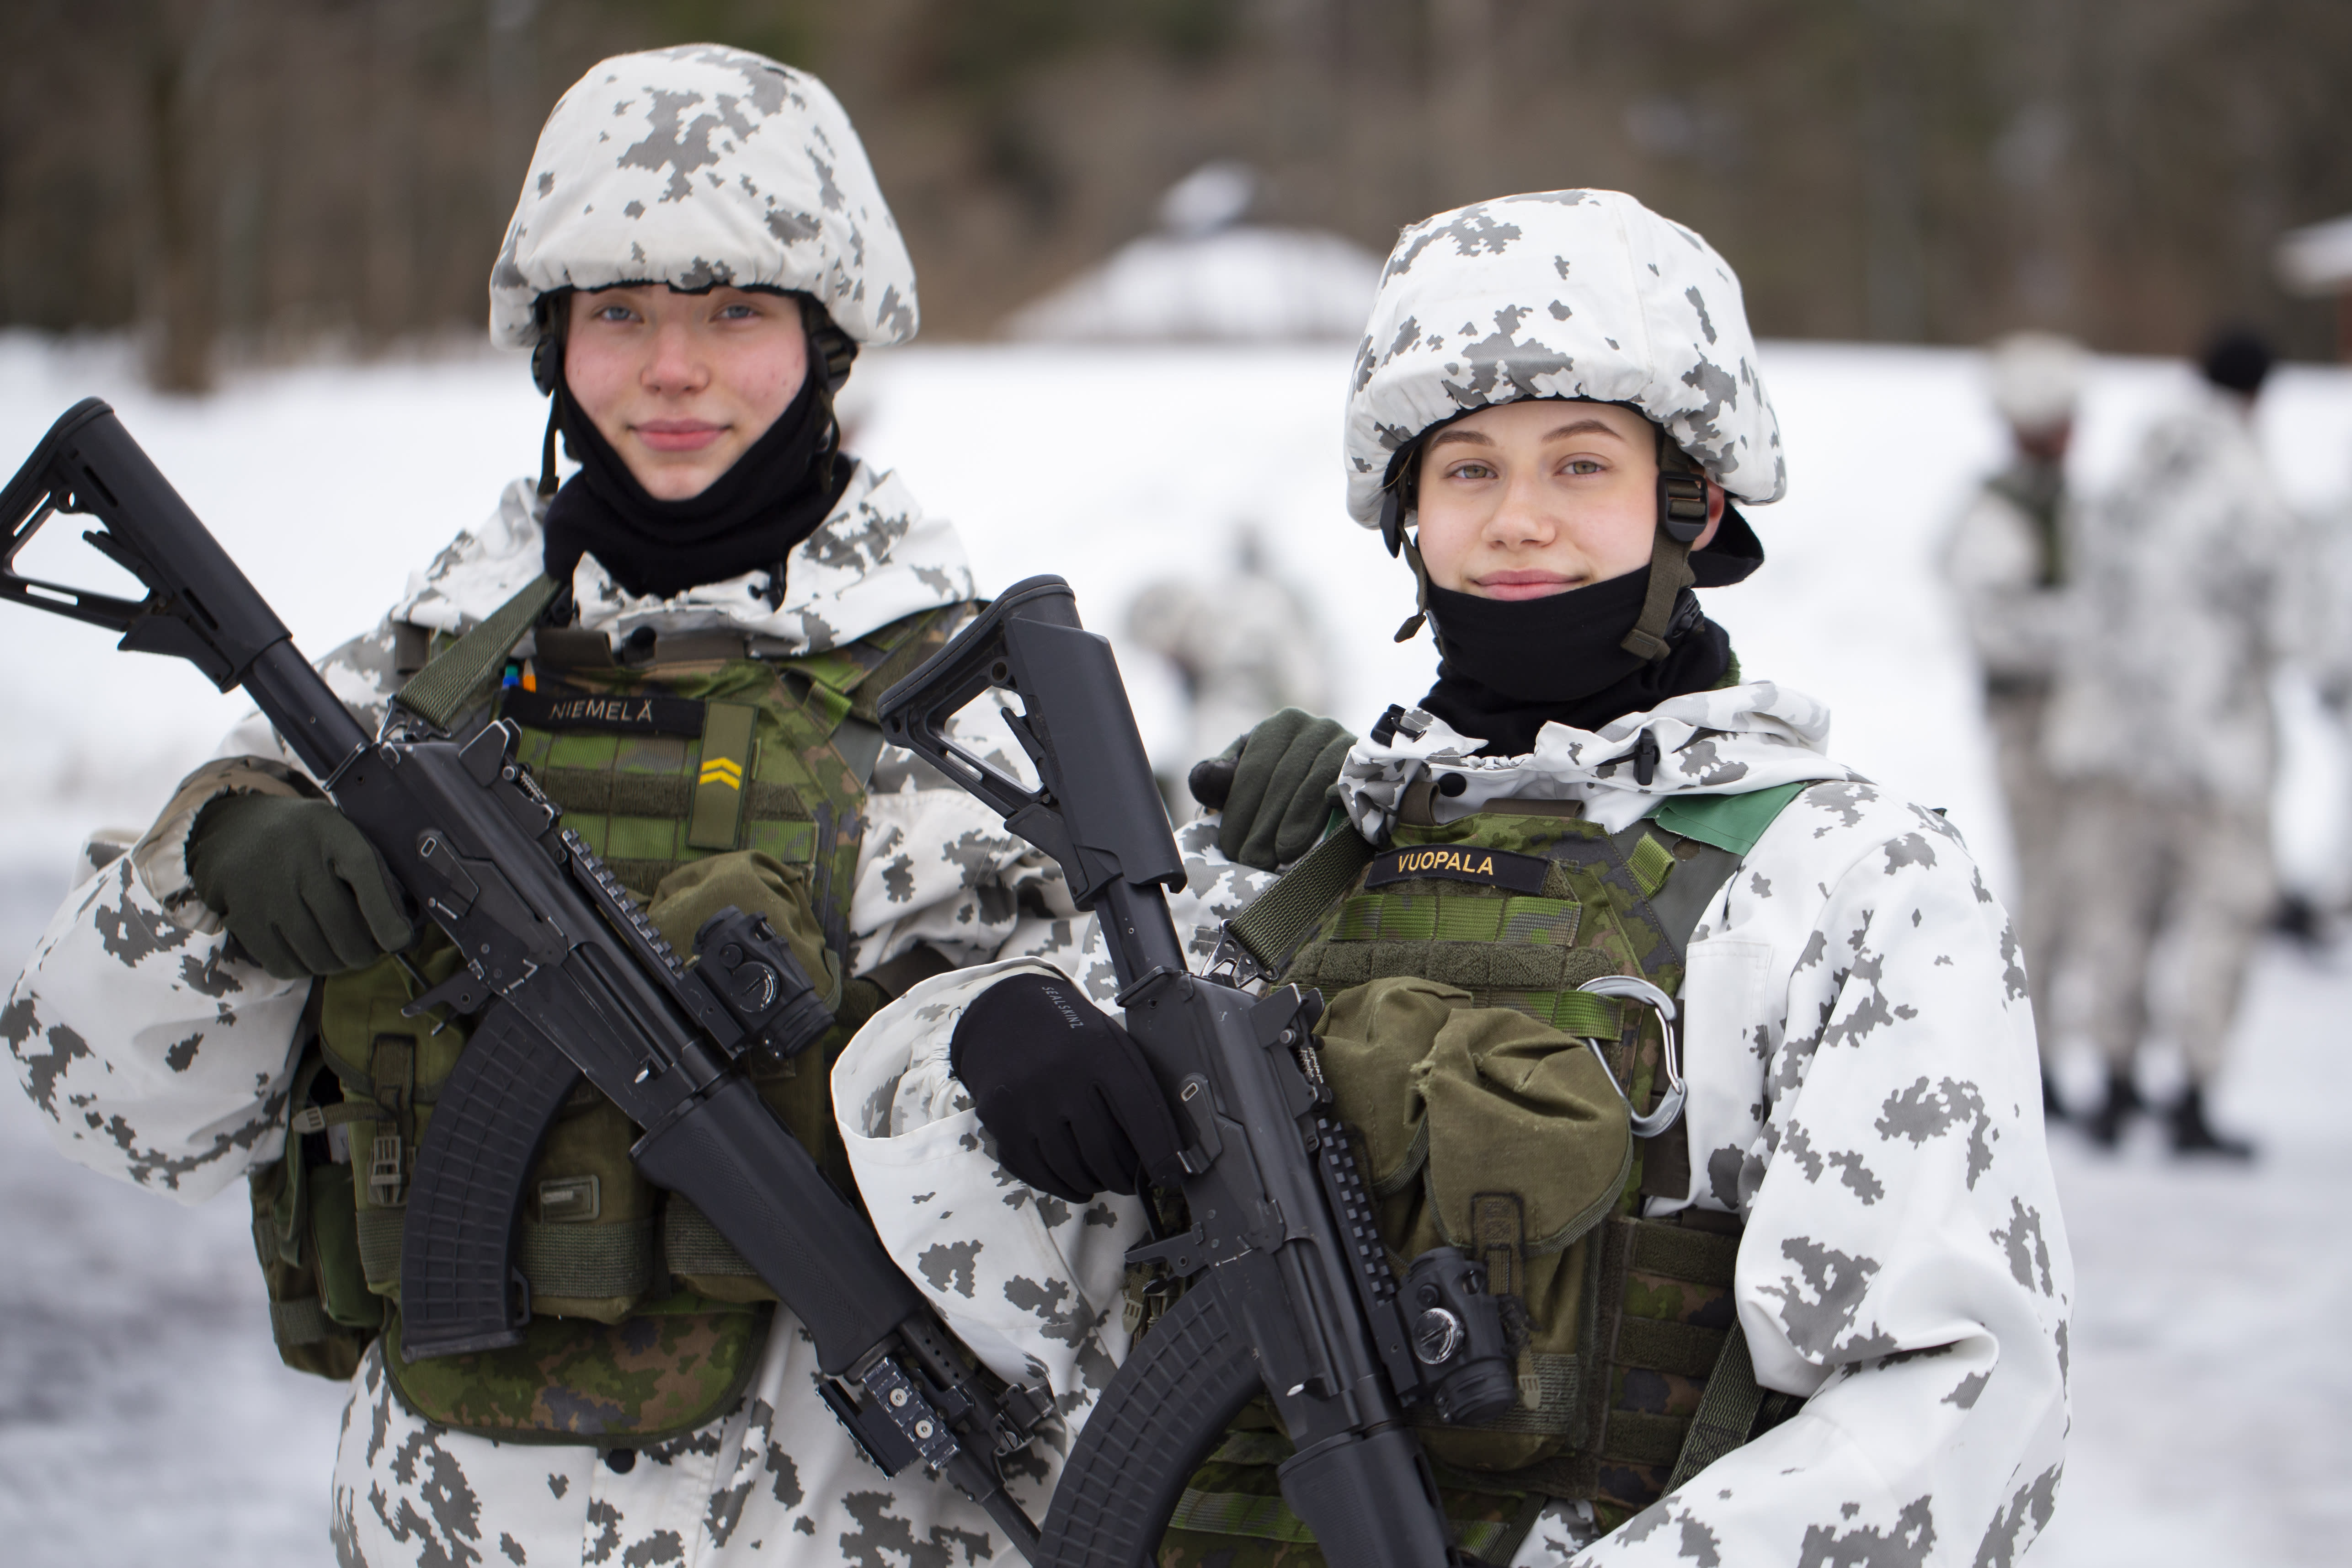 Almost 1,600 women volunteer for the Finnish military service